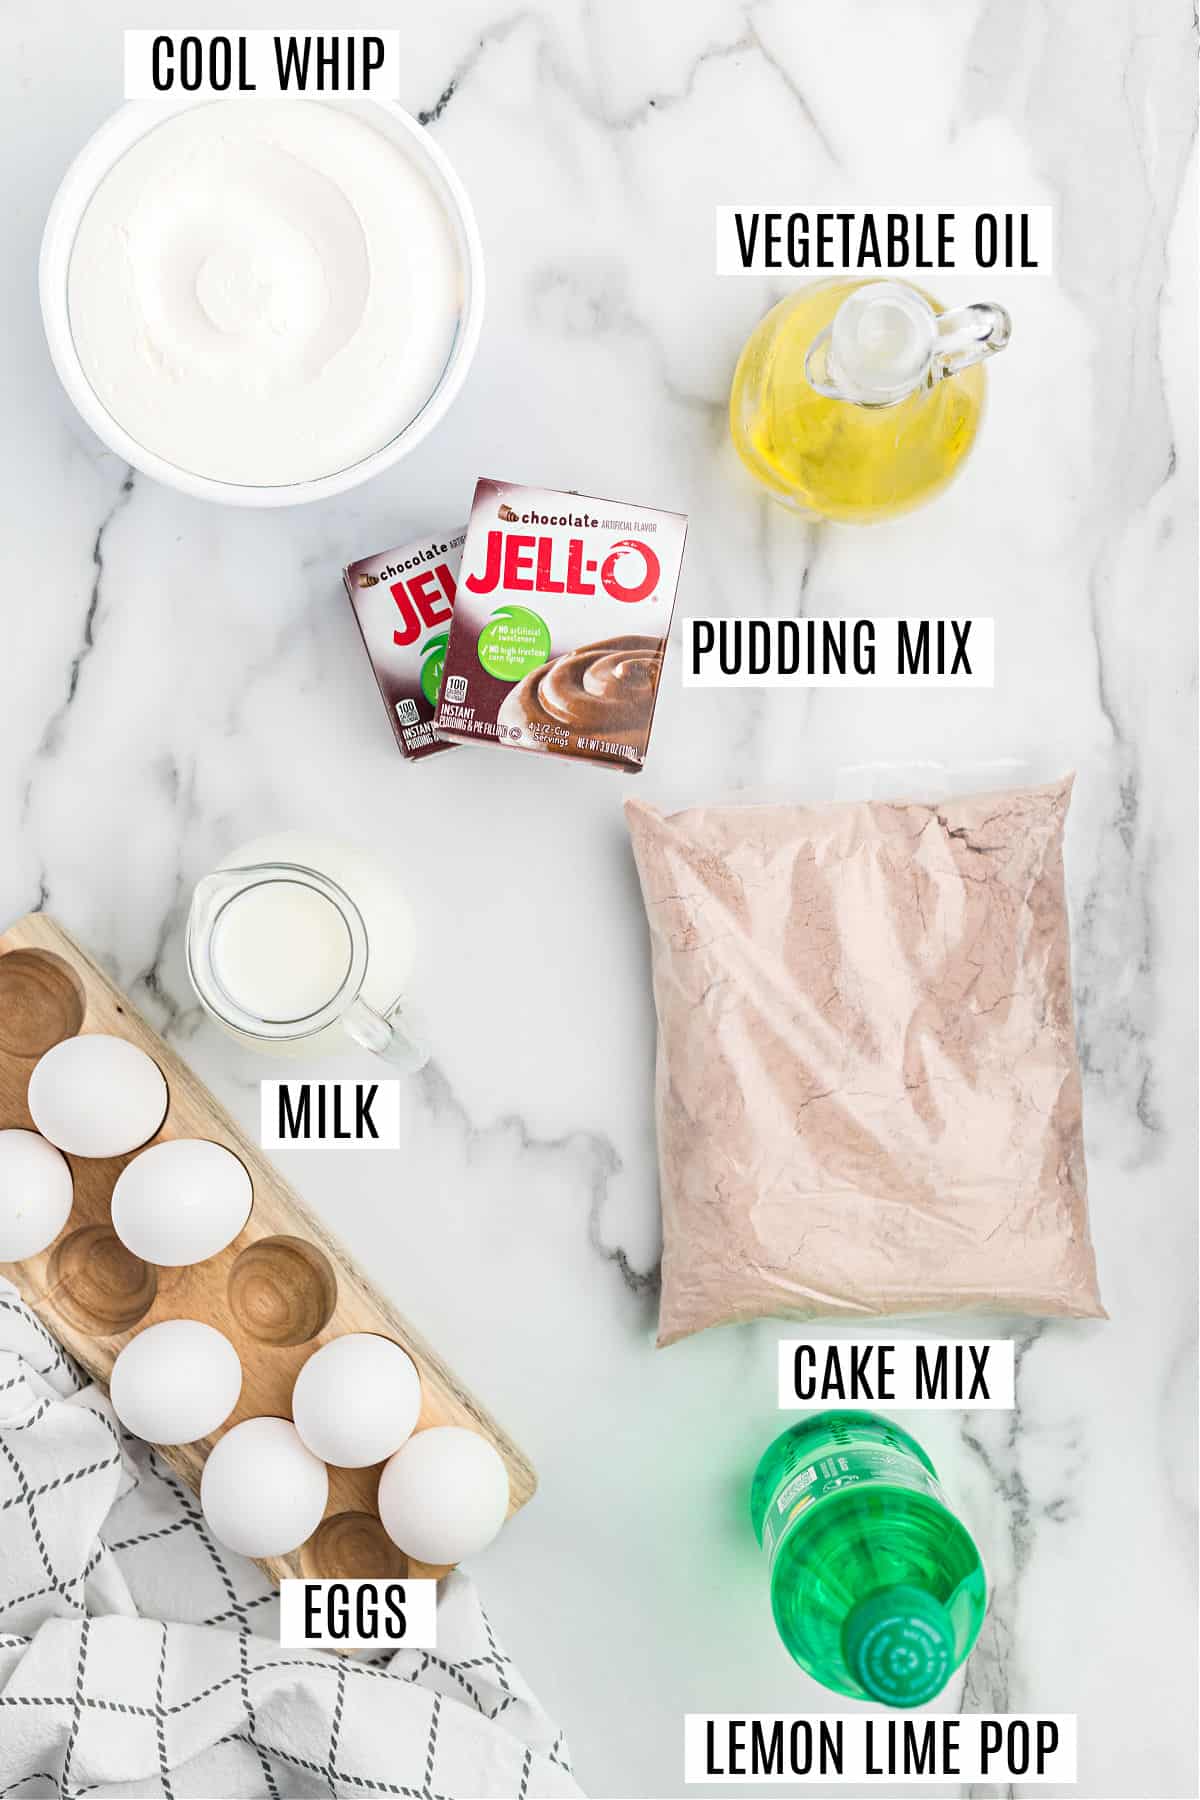 Ingredients needed to make chocolate cupcakes with chocolate pudding frosting.